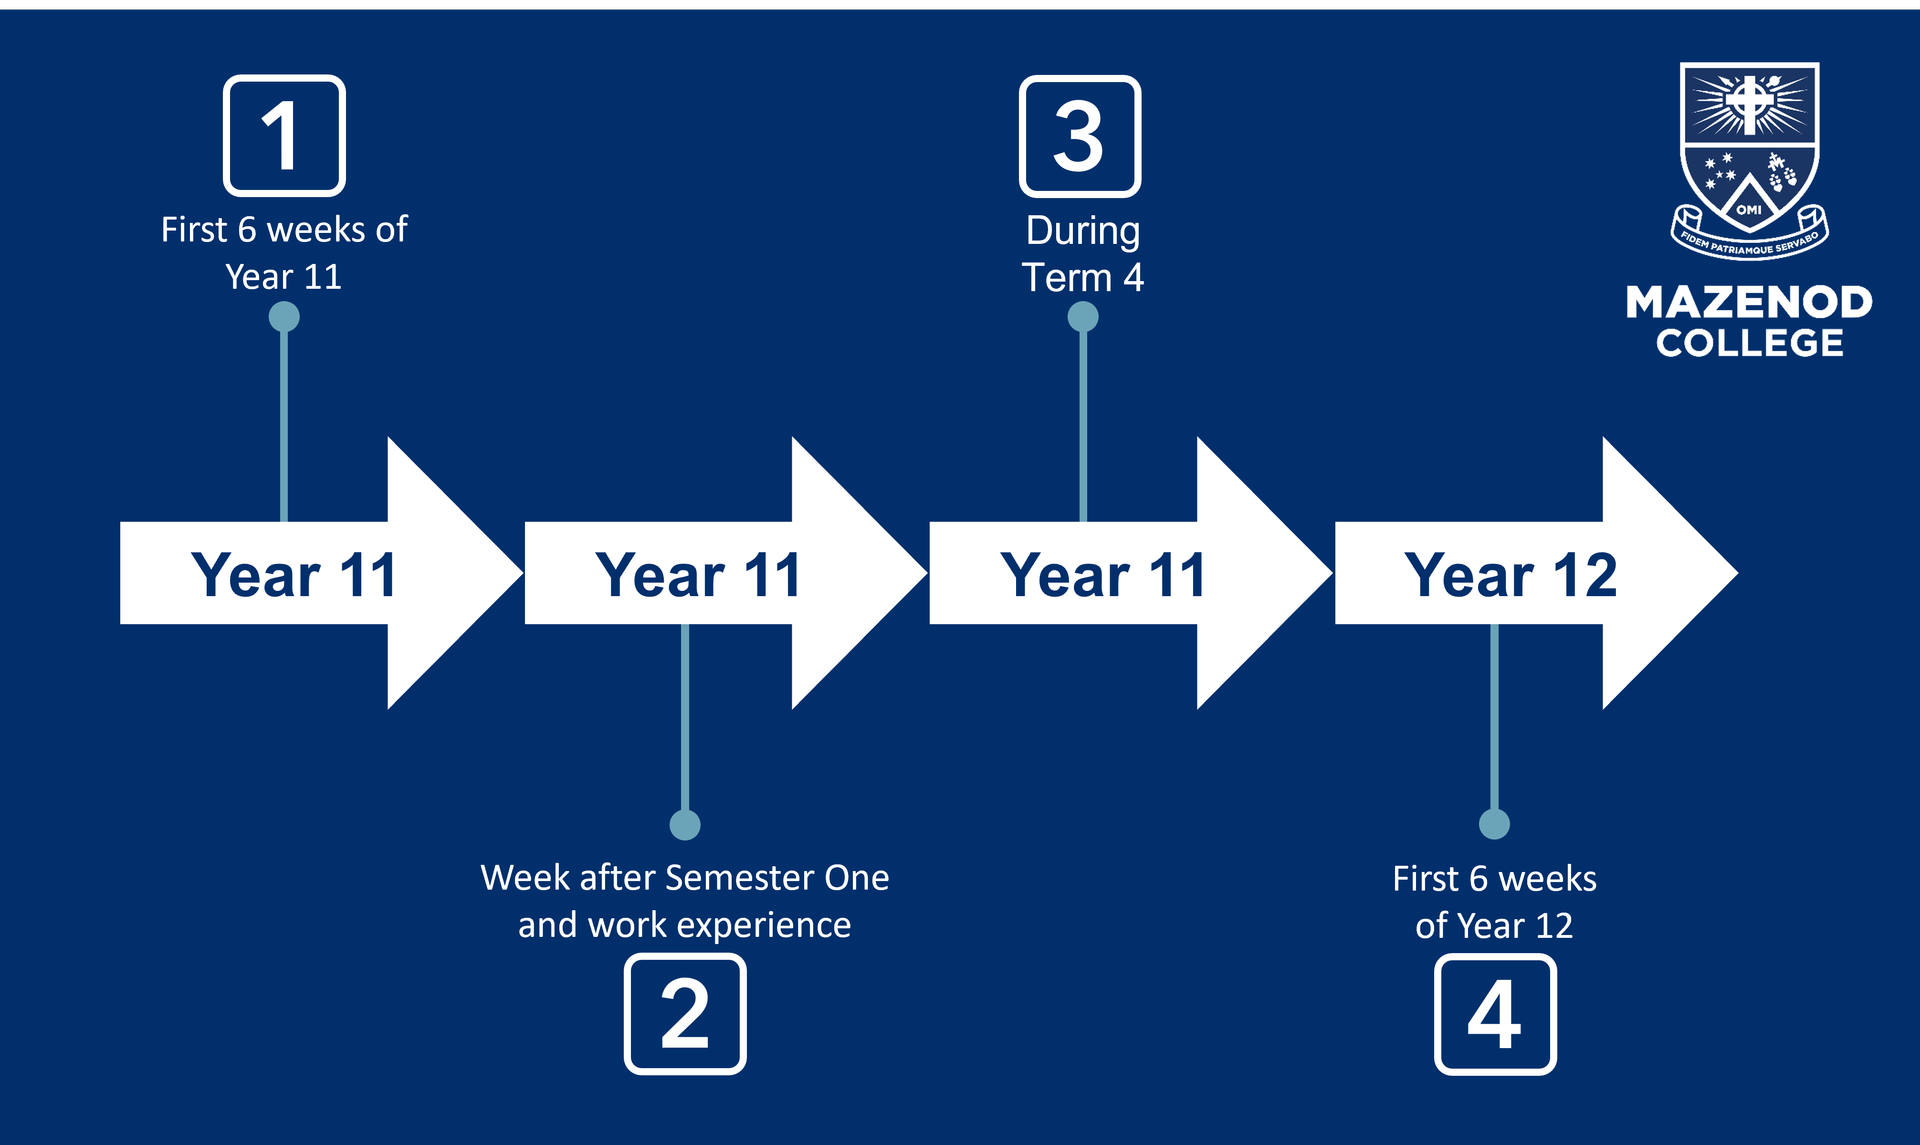 The Course Selection Timeline